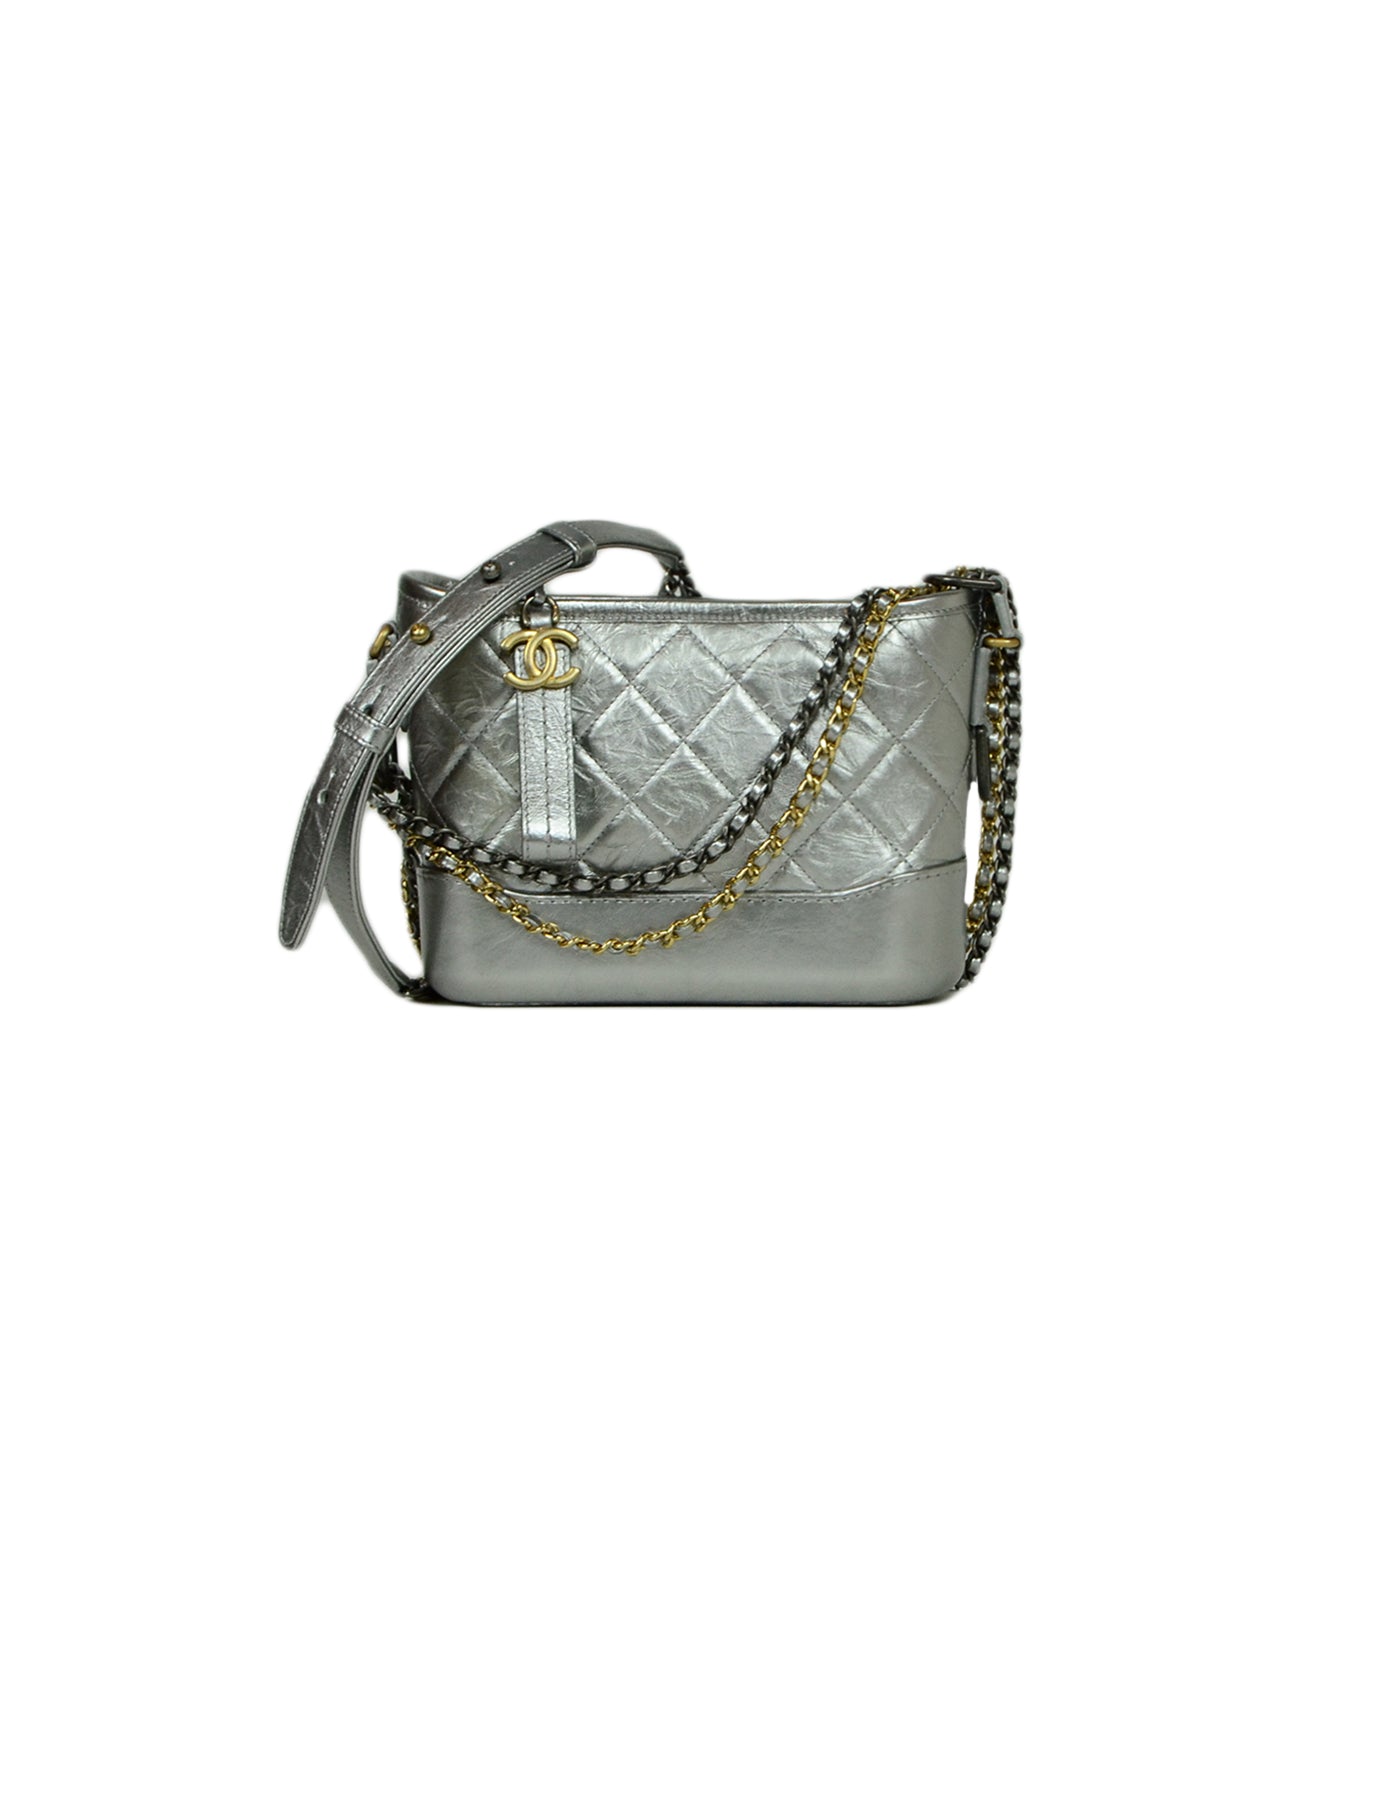 CHANEL Gabrielle 'Hobo' Bag in Aged White Quilted Leather and